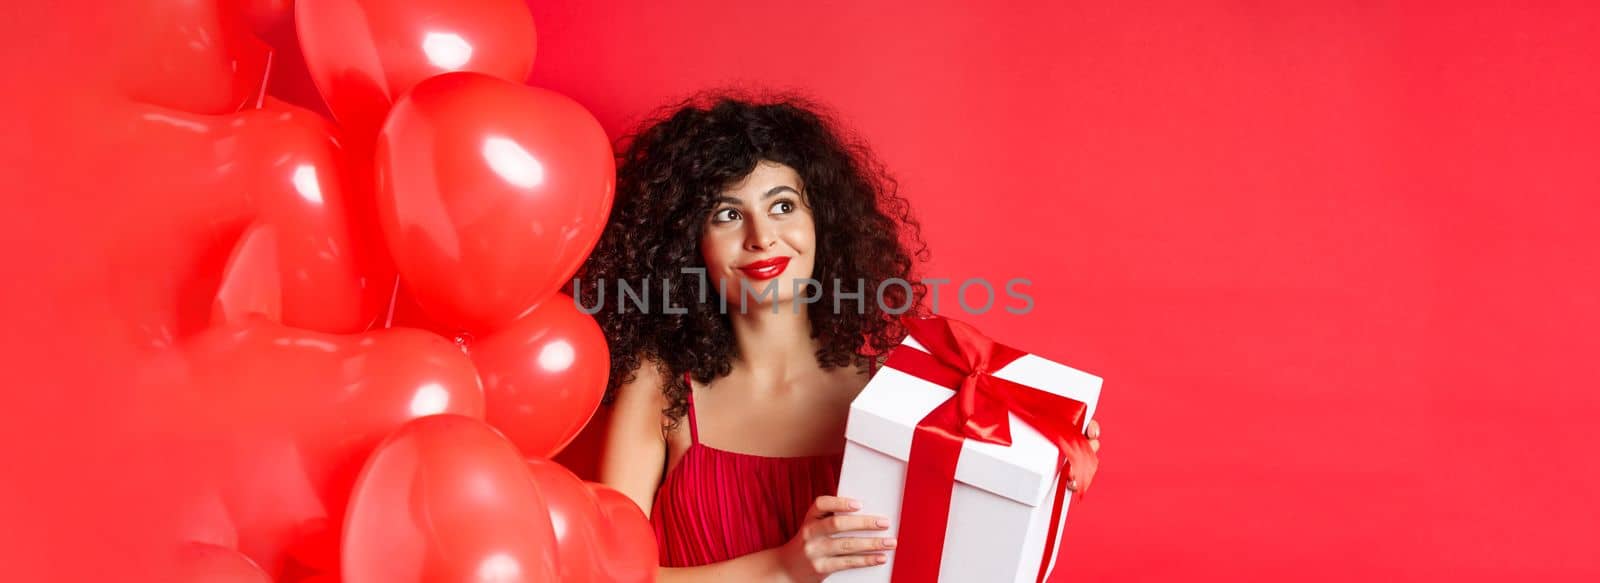 Gorgeous woman with makeup and evening dress, receive surprise gift and smiling, standing on red background near Valentines day romantic balloons.